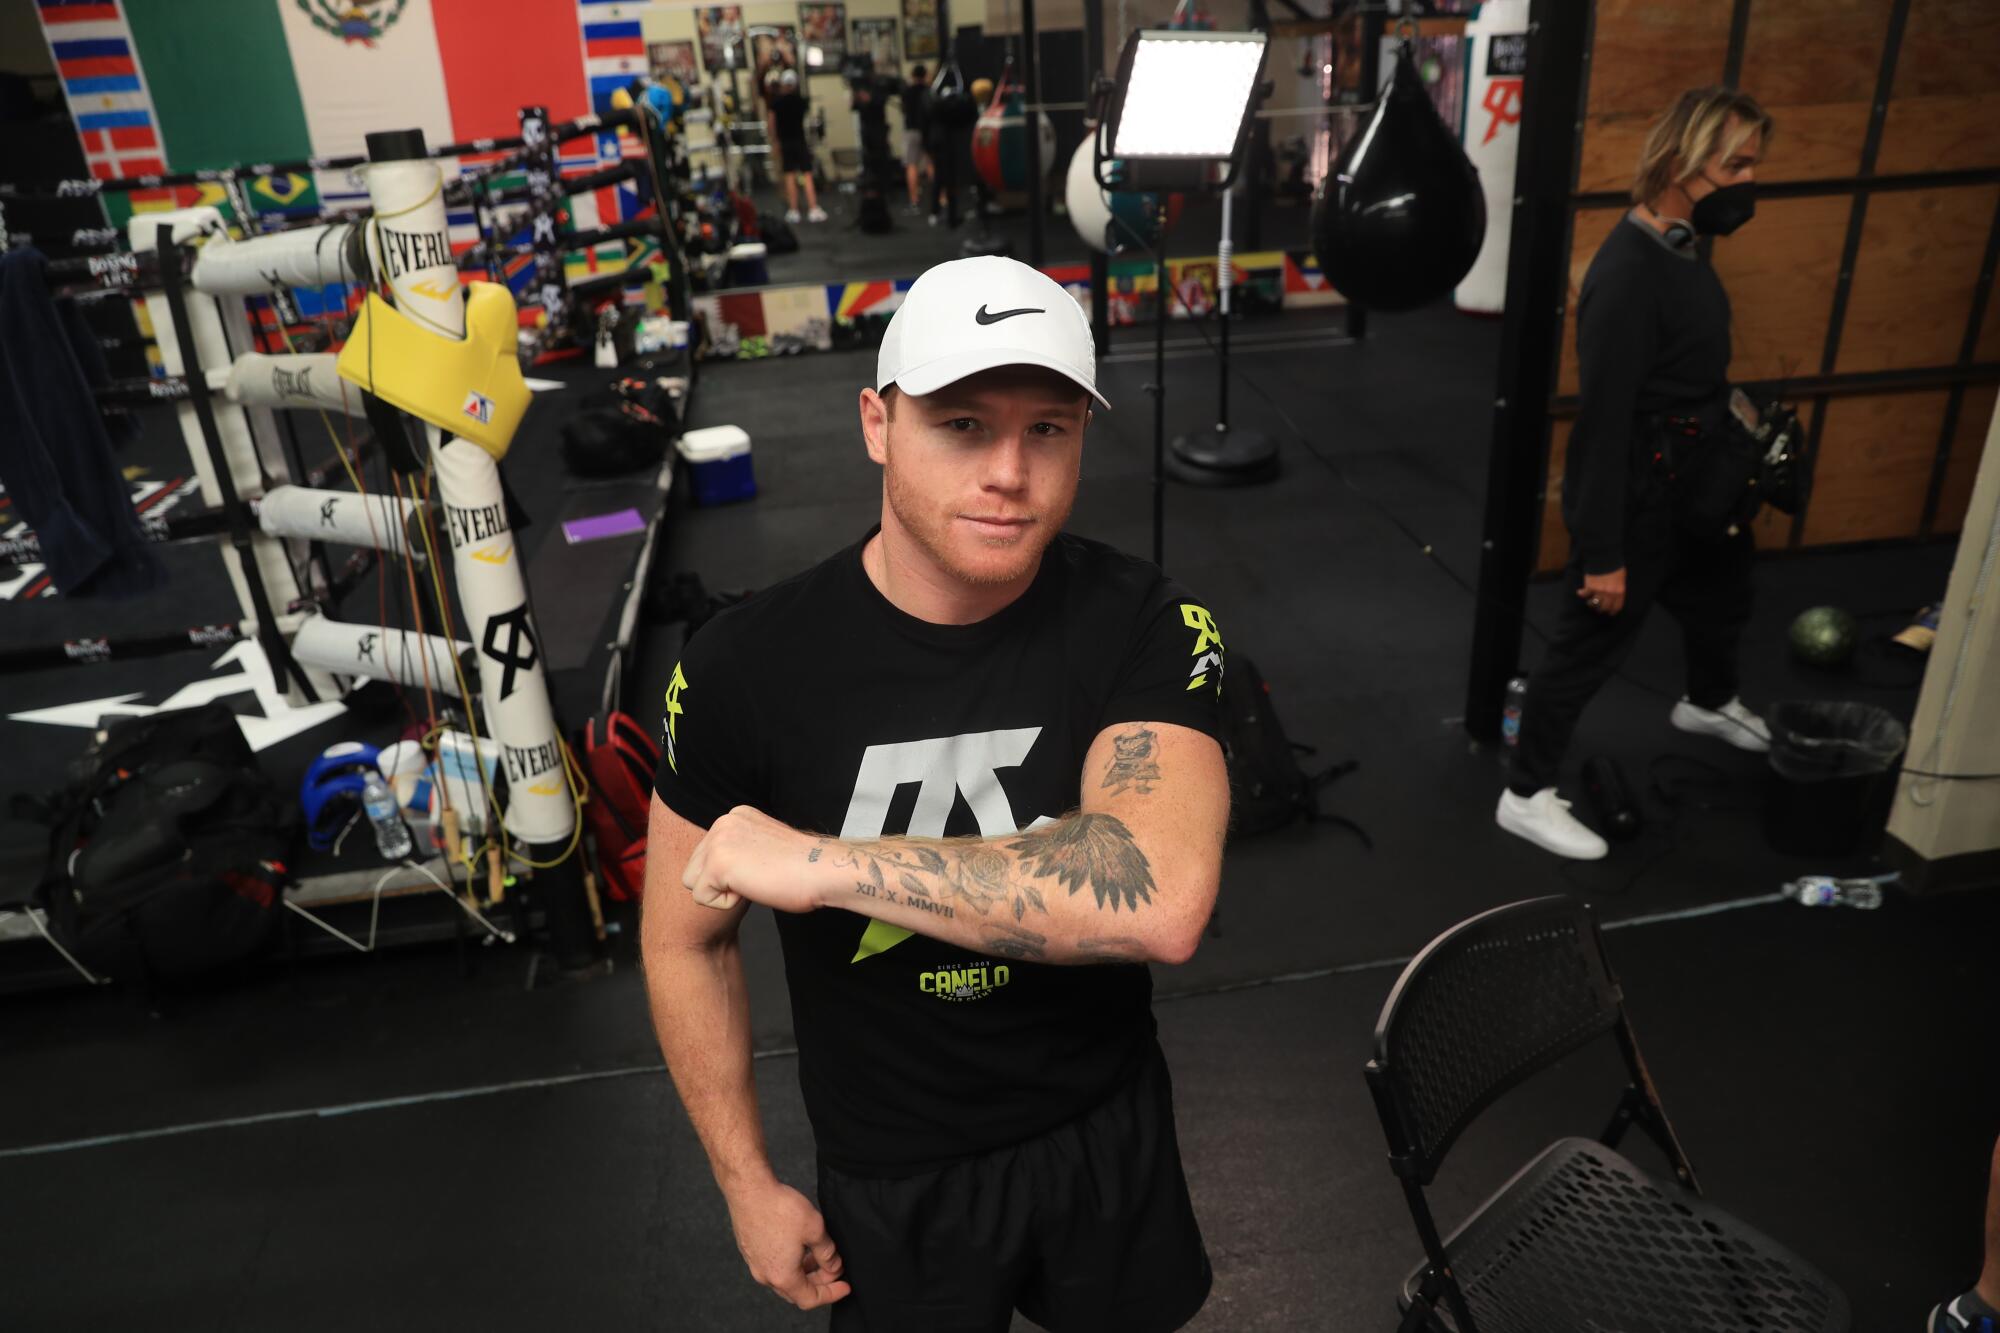 Canelo Álvarez shows off his tattoos while training at his gym in San Diego